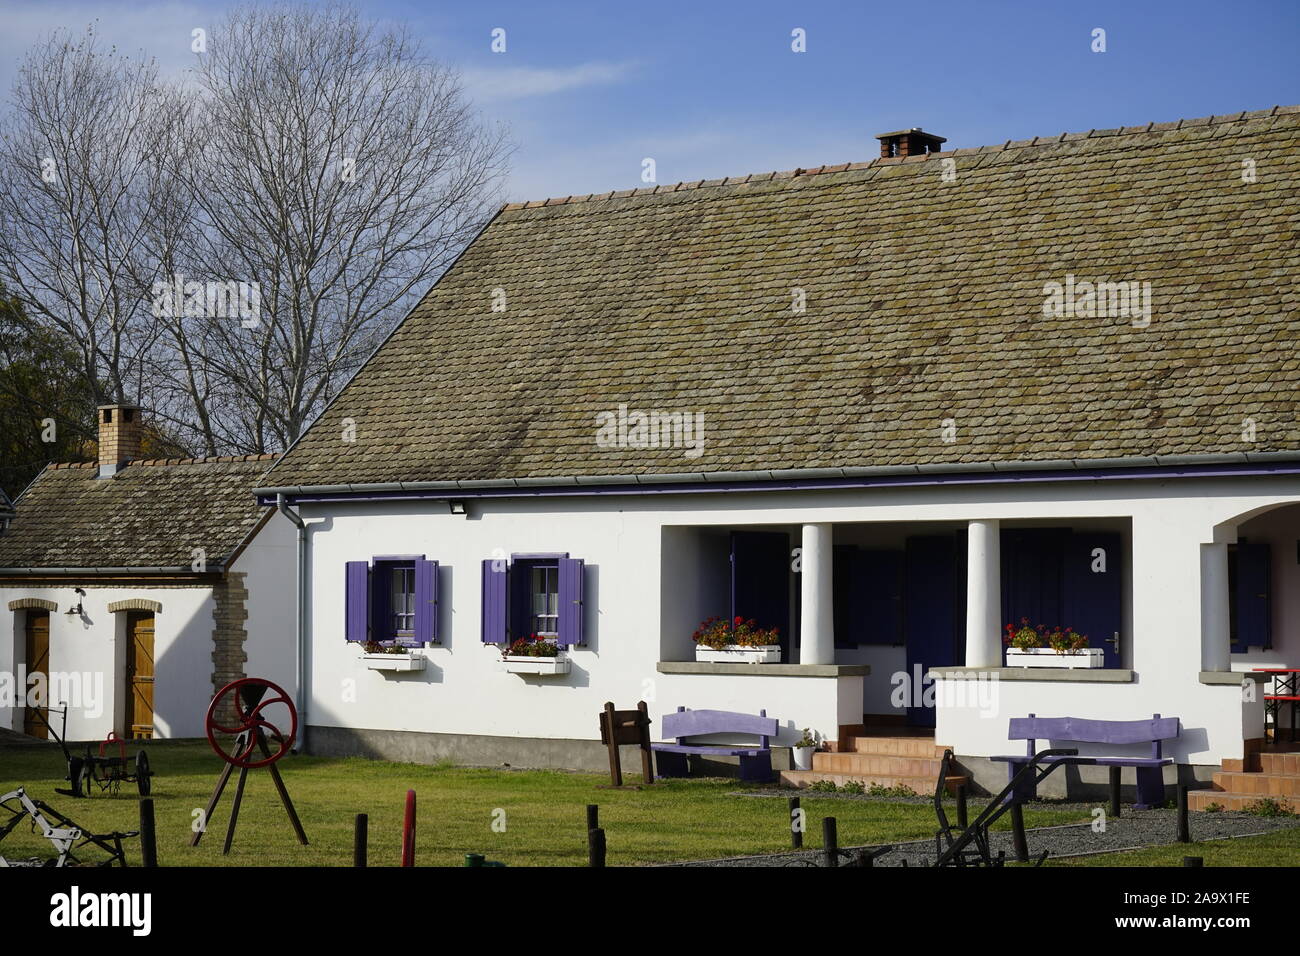 Zichy Hotel Ungherese farm house Foto Stock